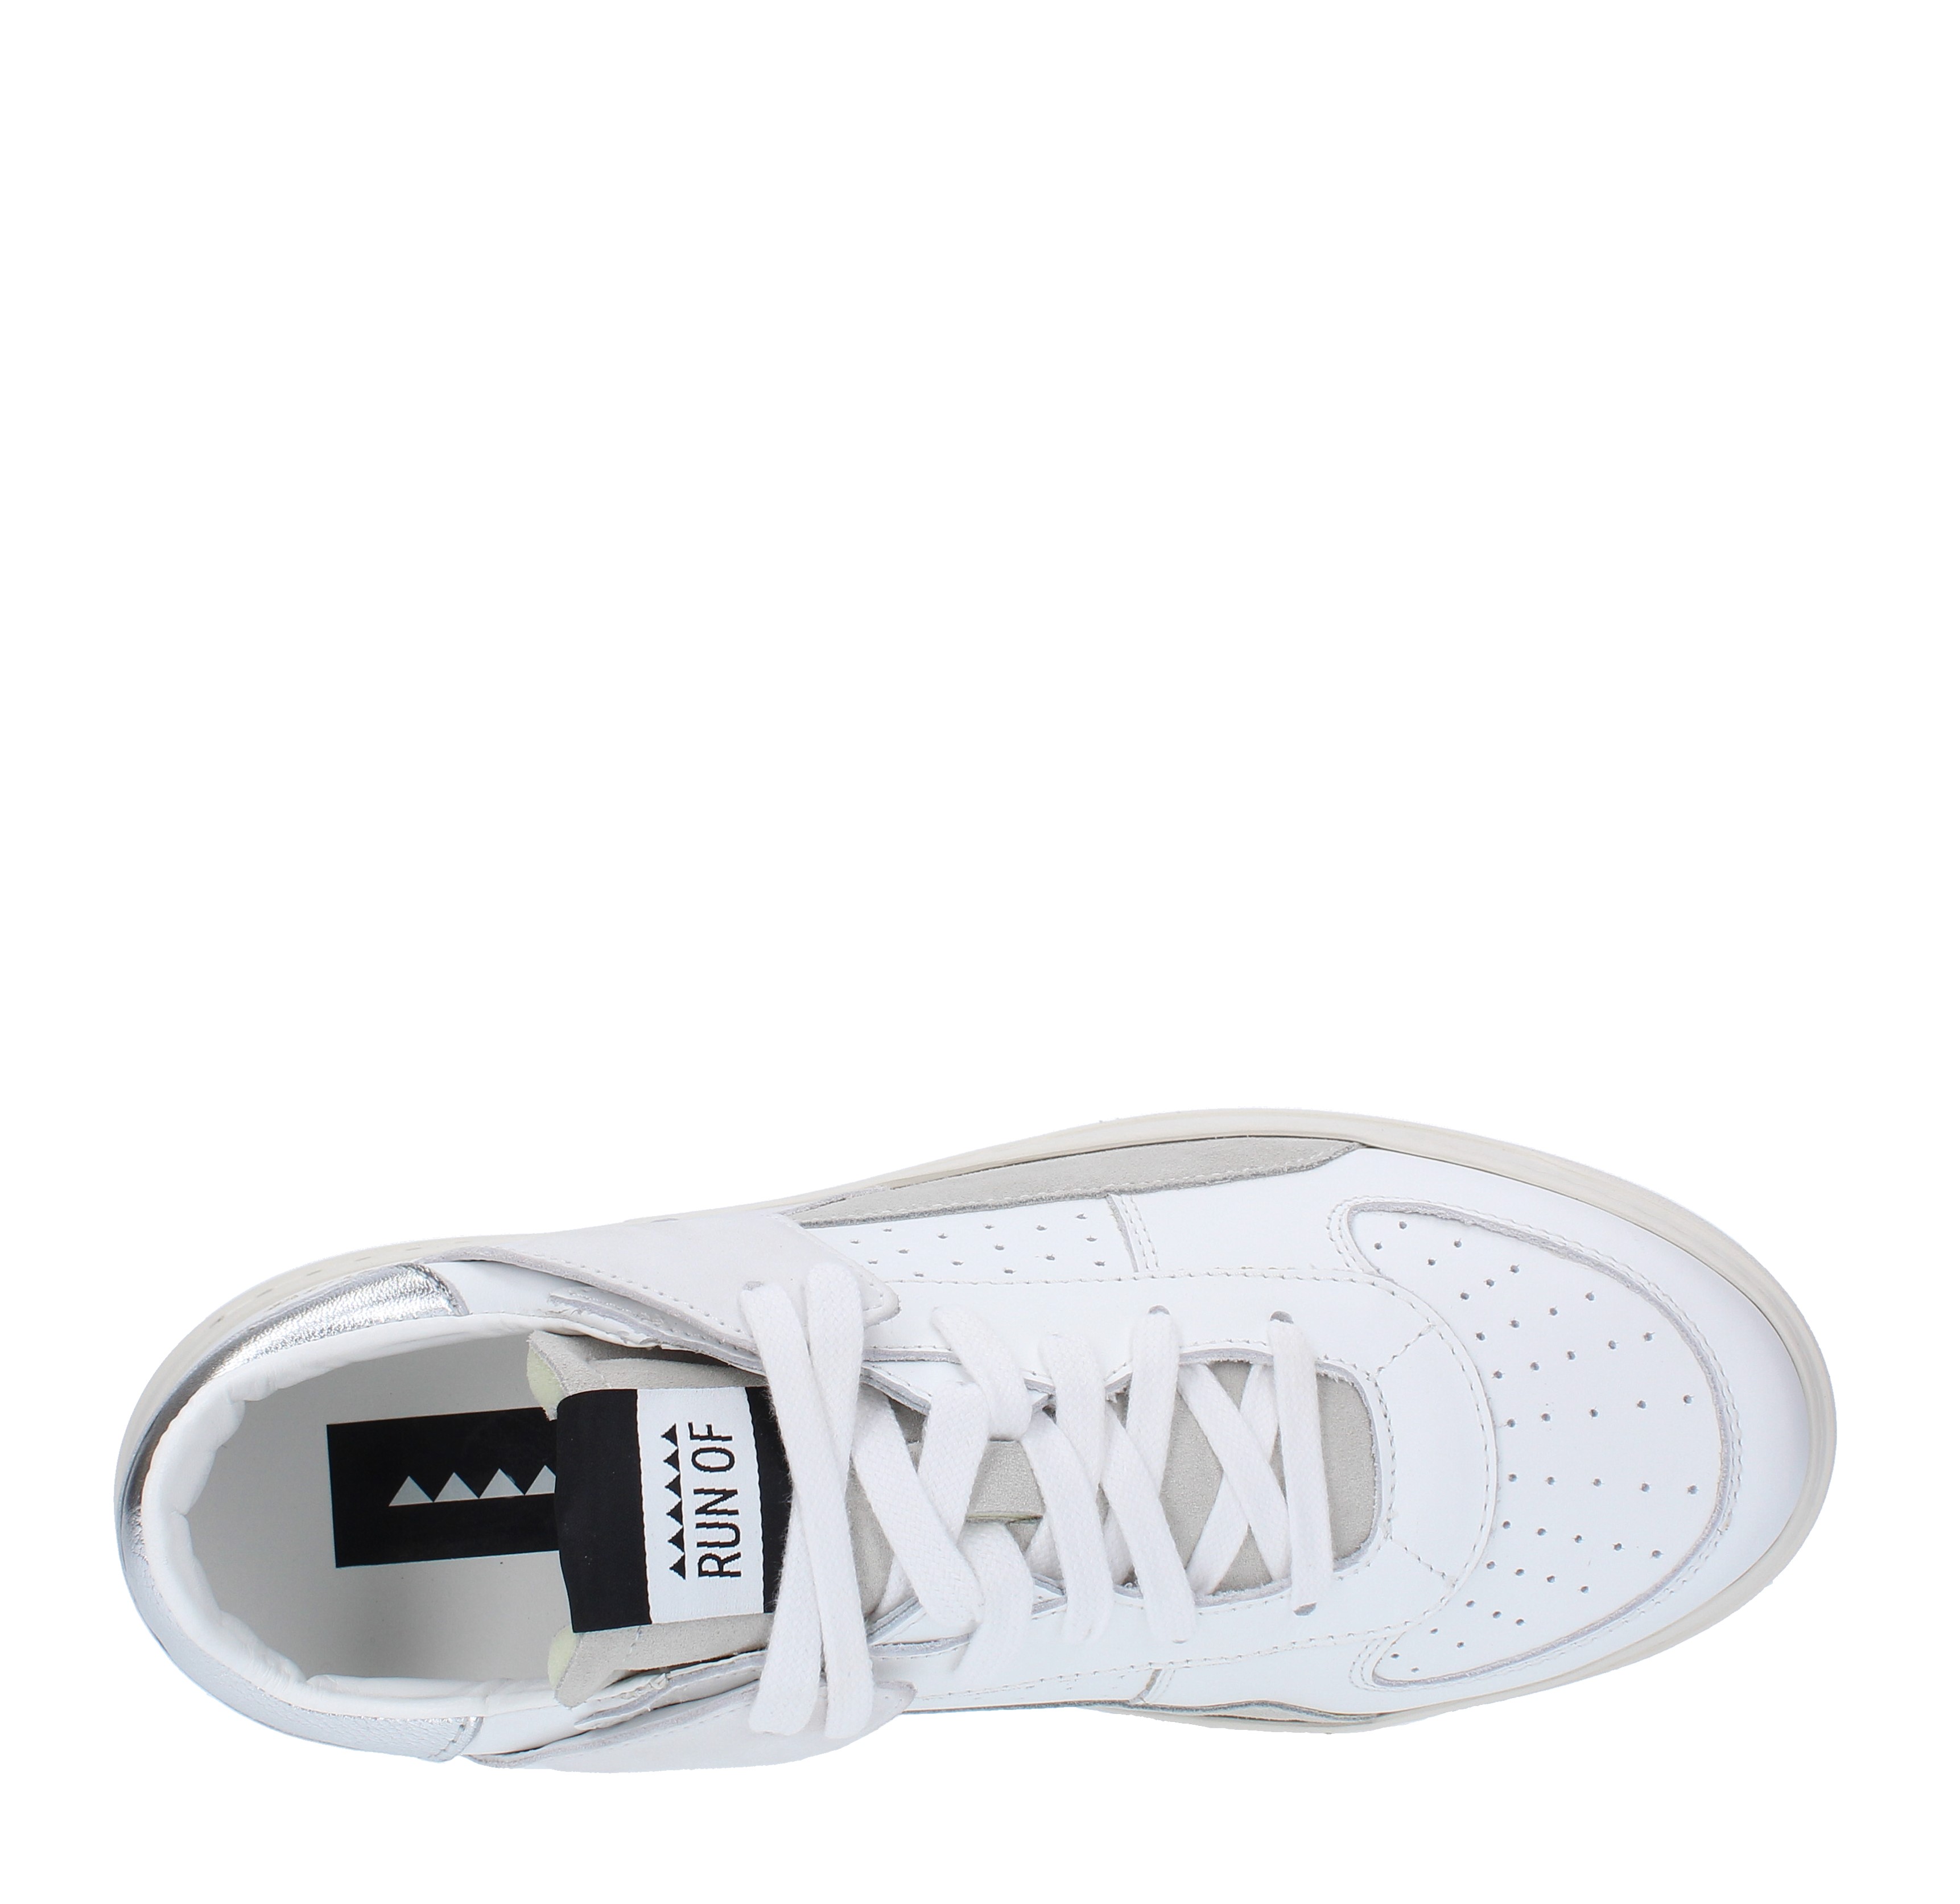 NOBODY RUN OF trainers in suede leather RUN OF | NOBODY SENZA STRAPPO MBIANCO-ARGENTO